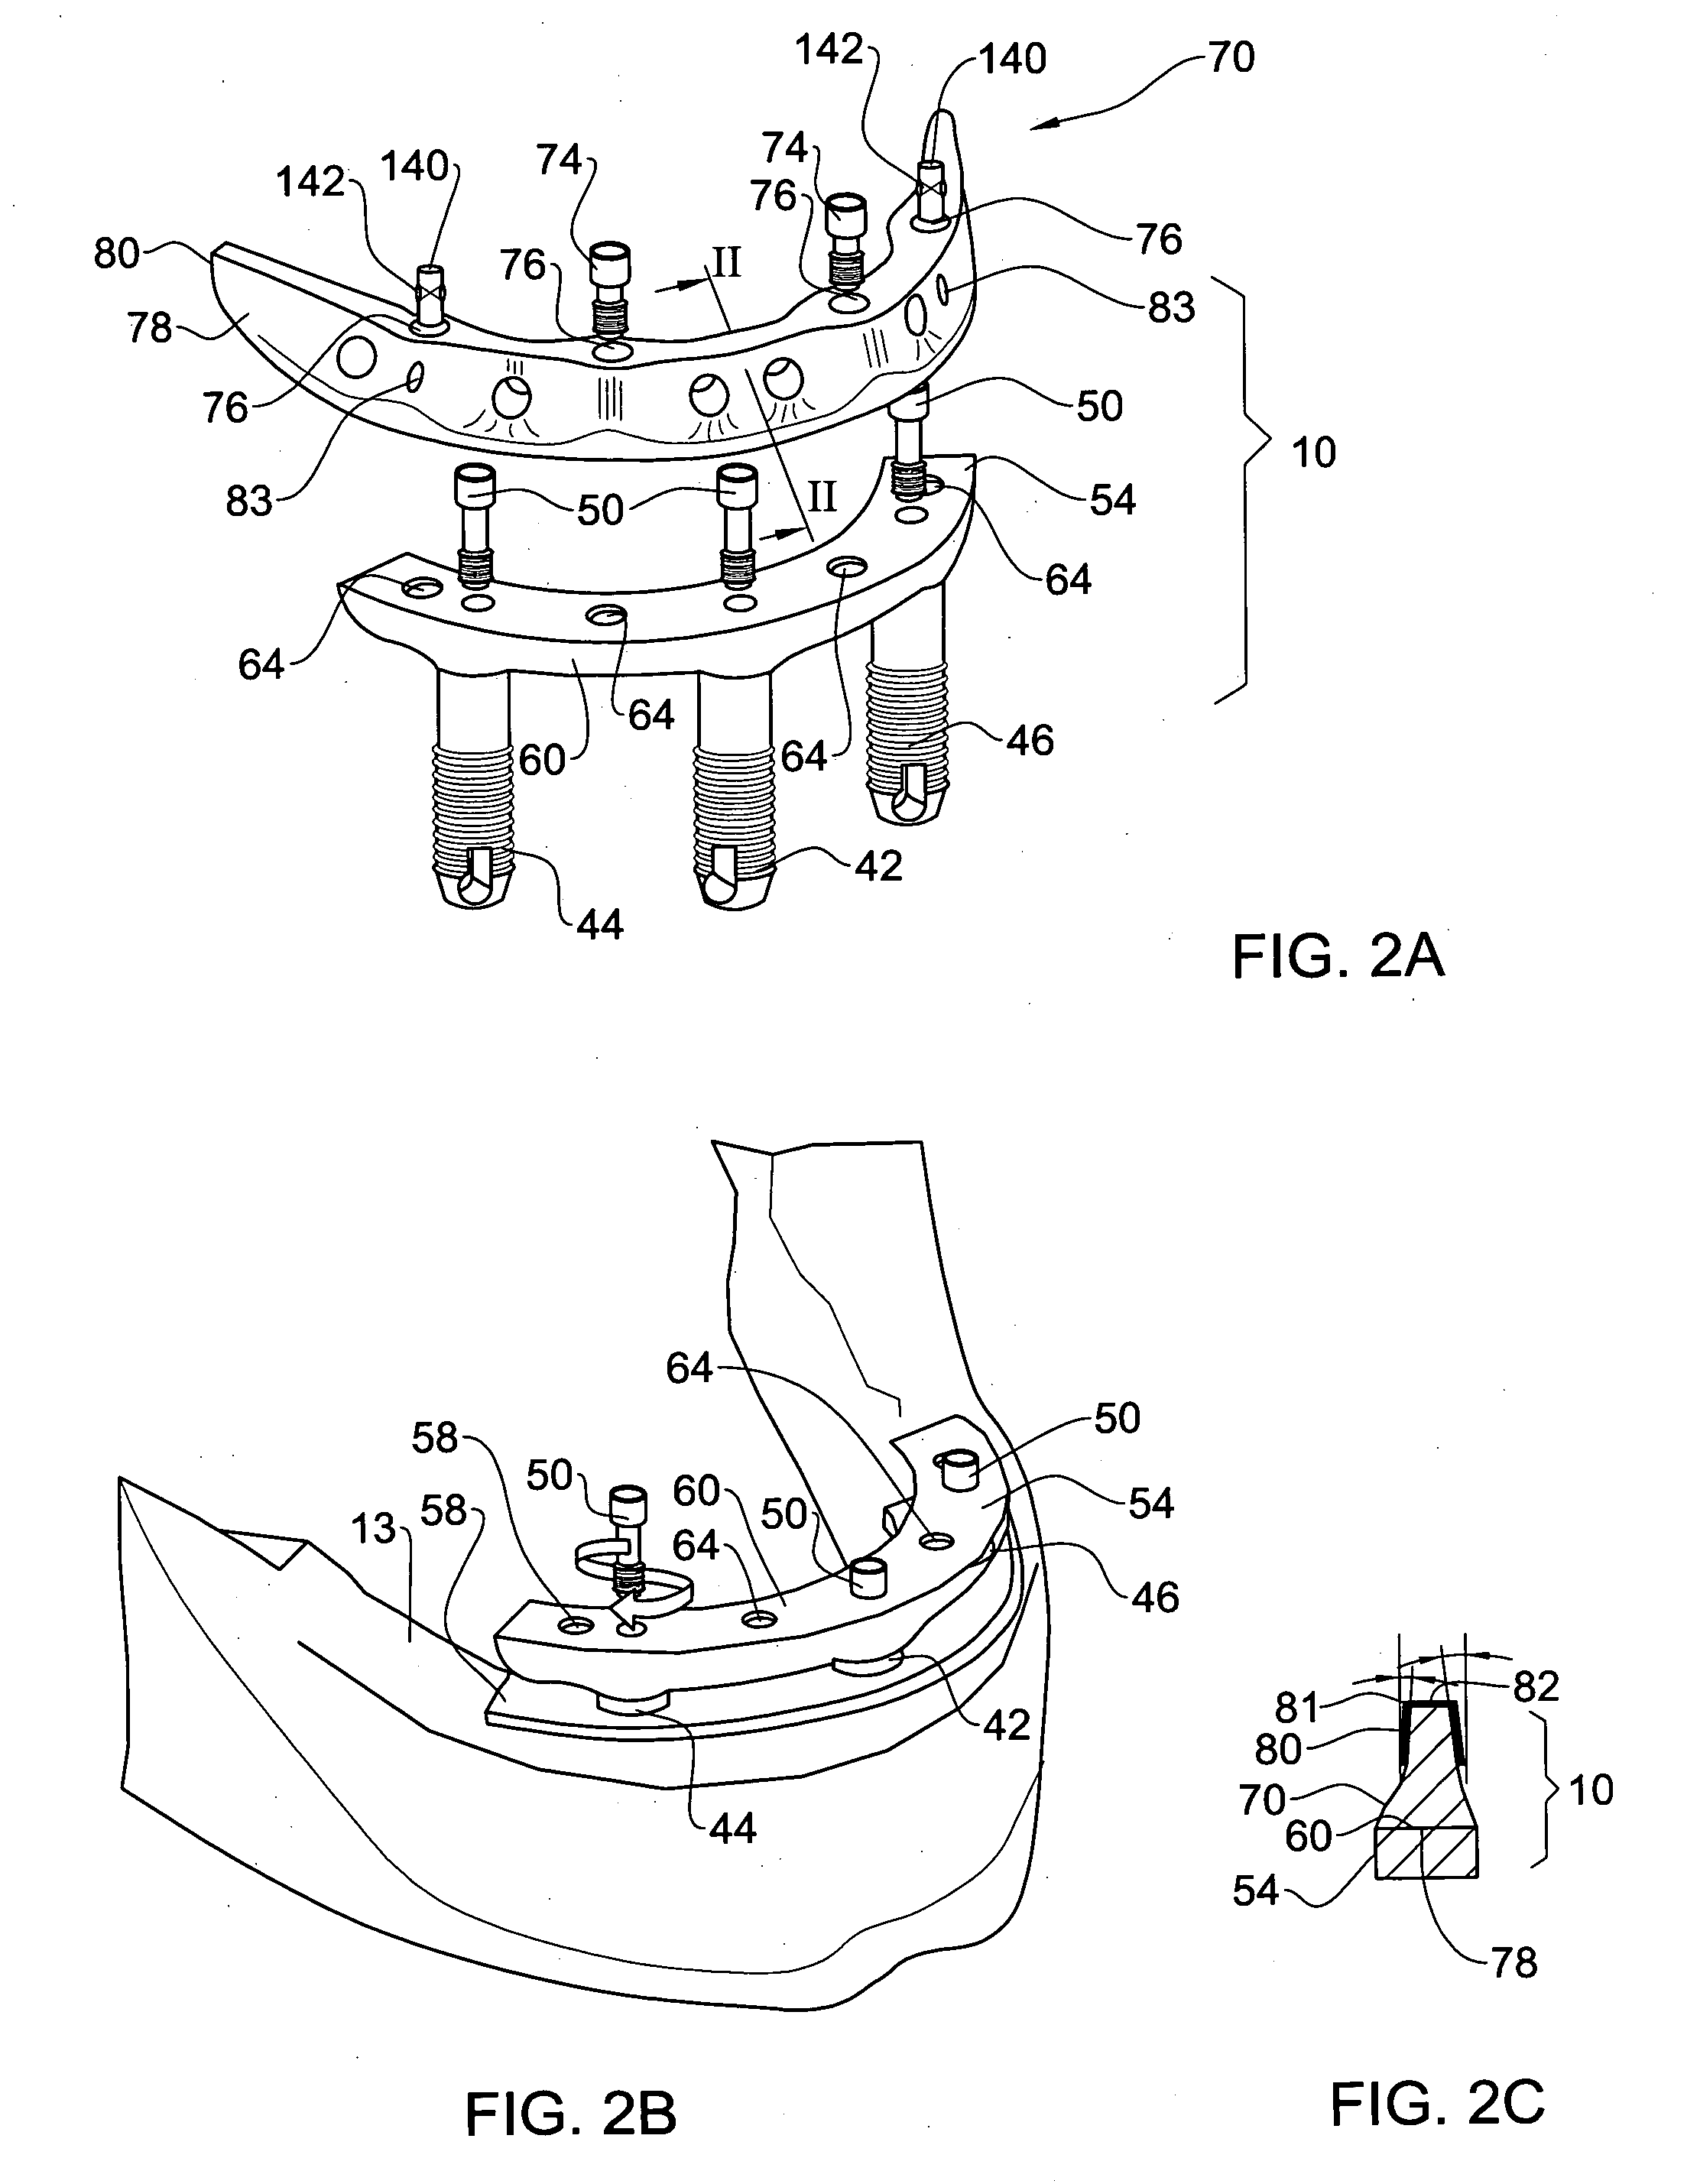 Method and system for fixing removable dentures